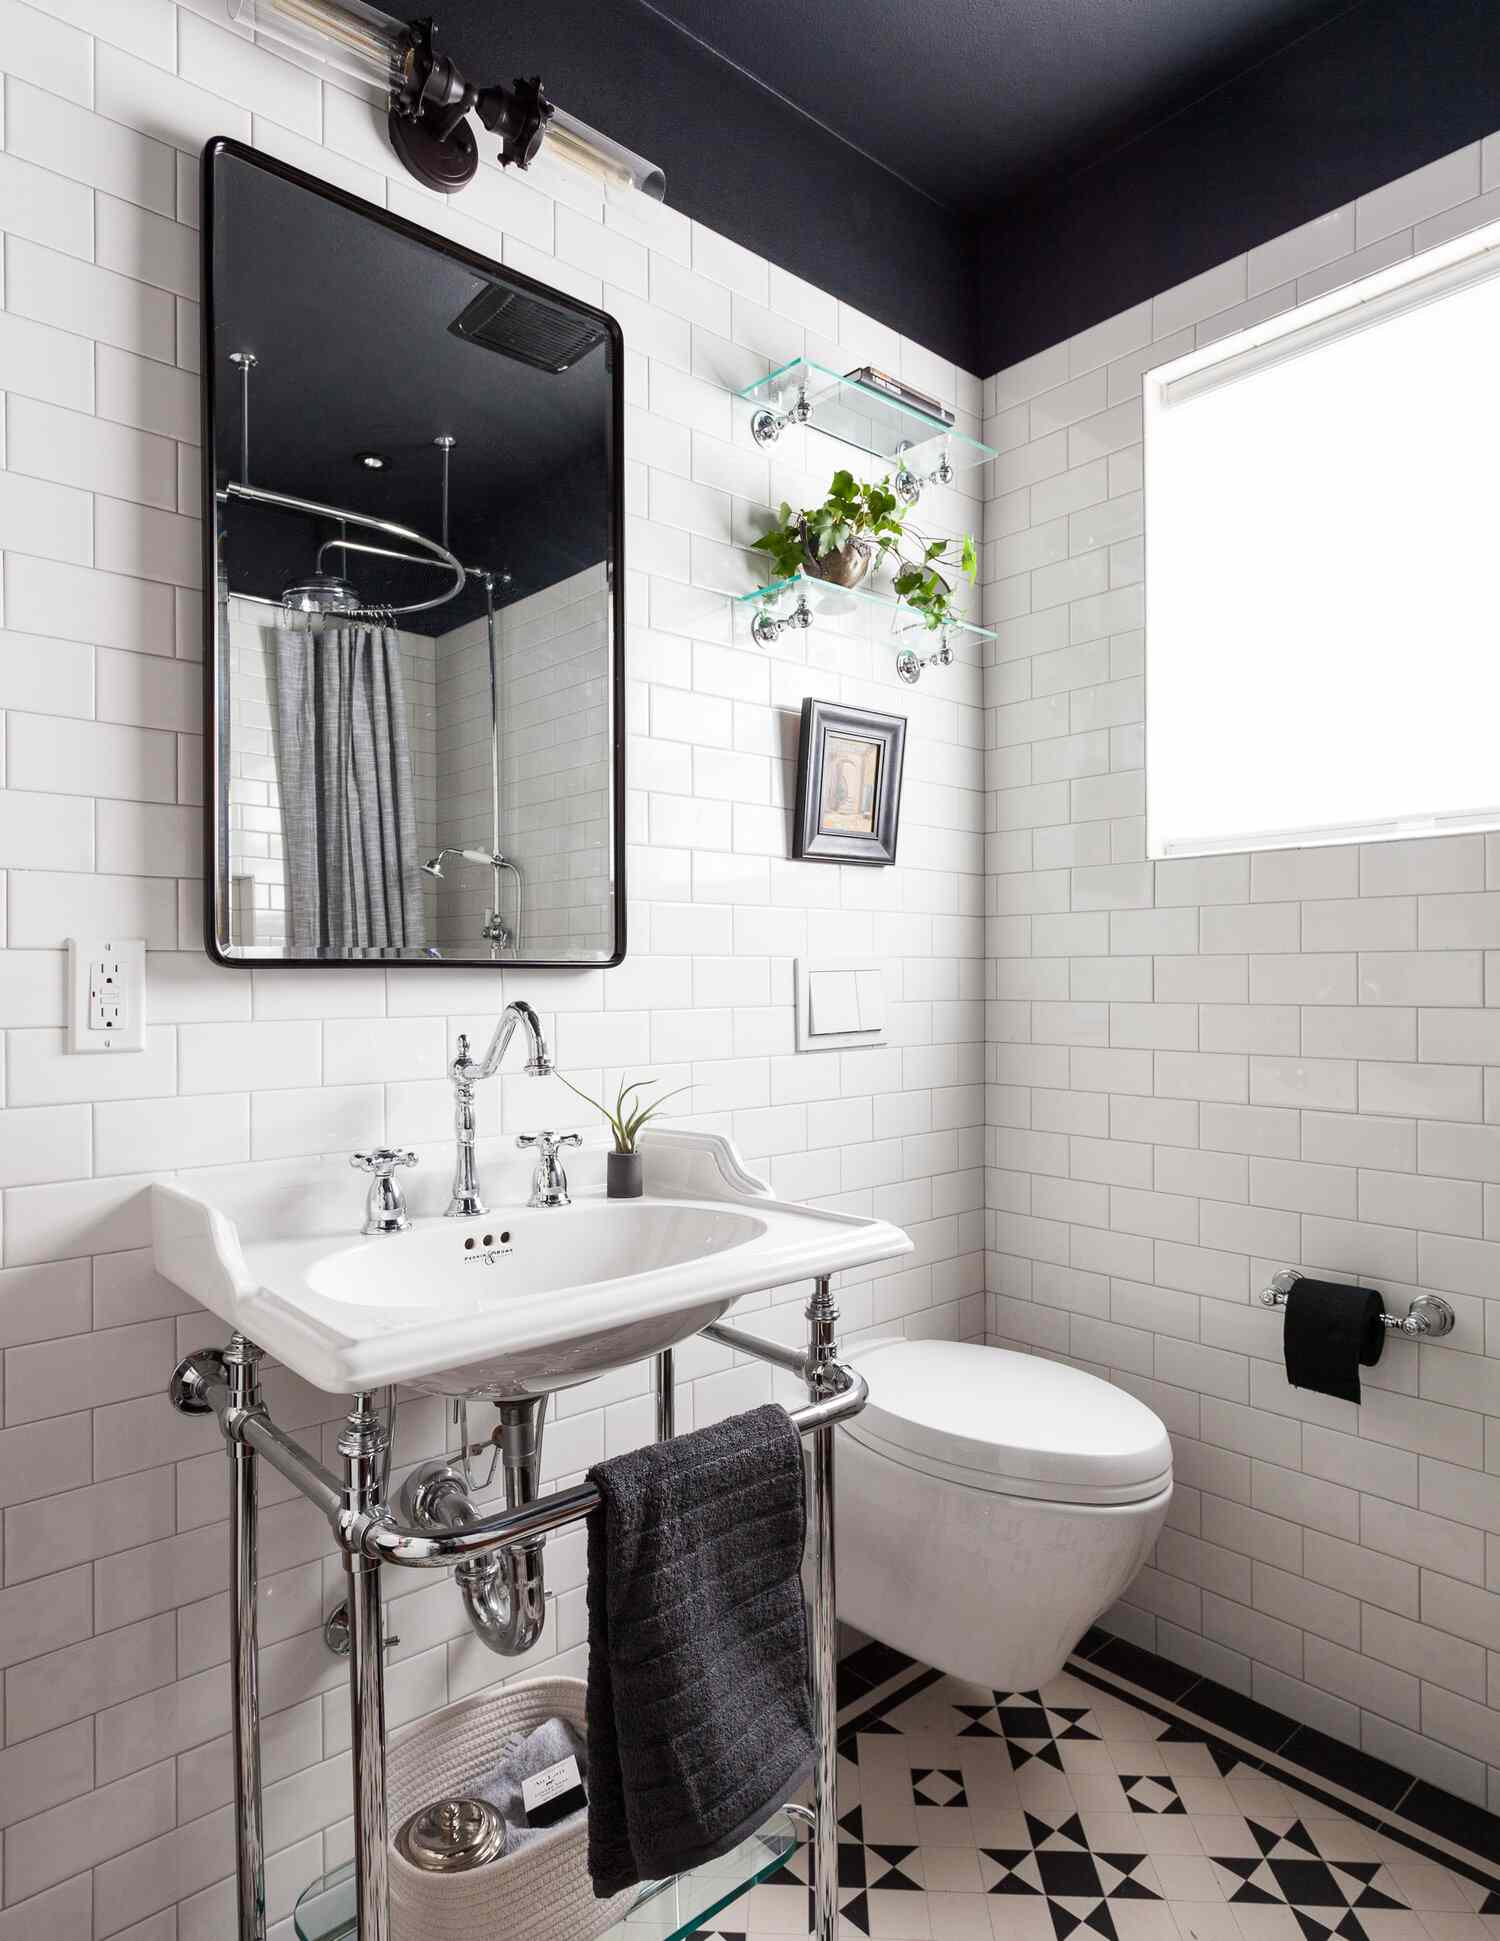 Bathroom art ideas – 10 ways to create a unique more personal space